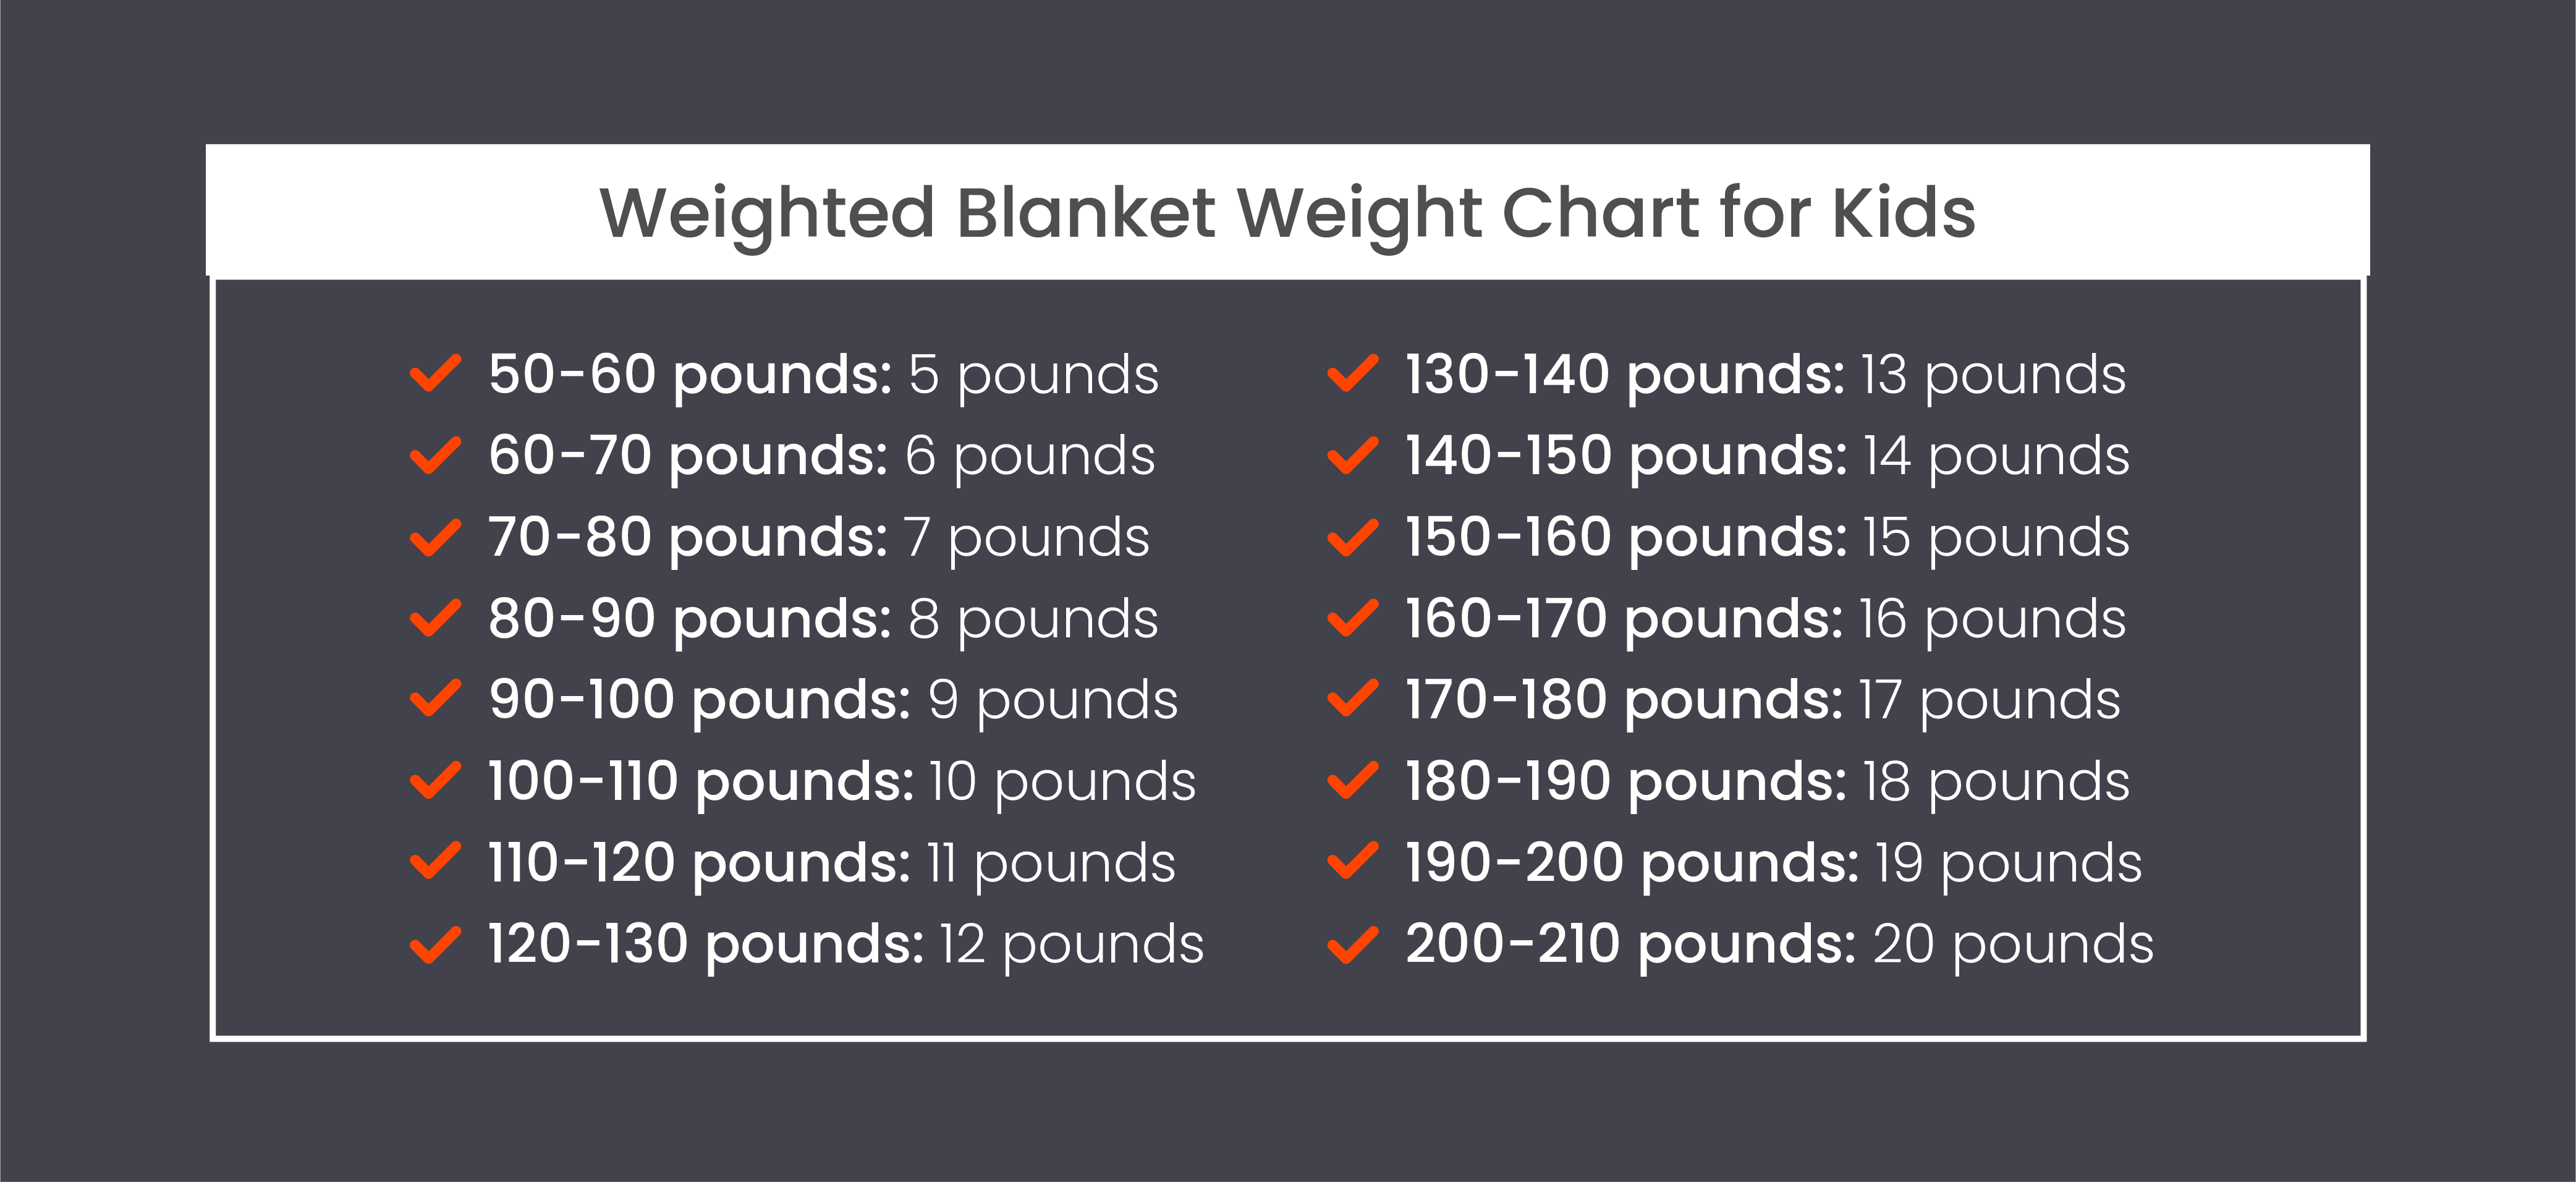 How Heavy Should a Weighted Blanket for Kids Be